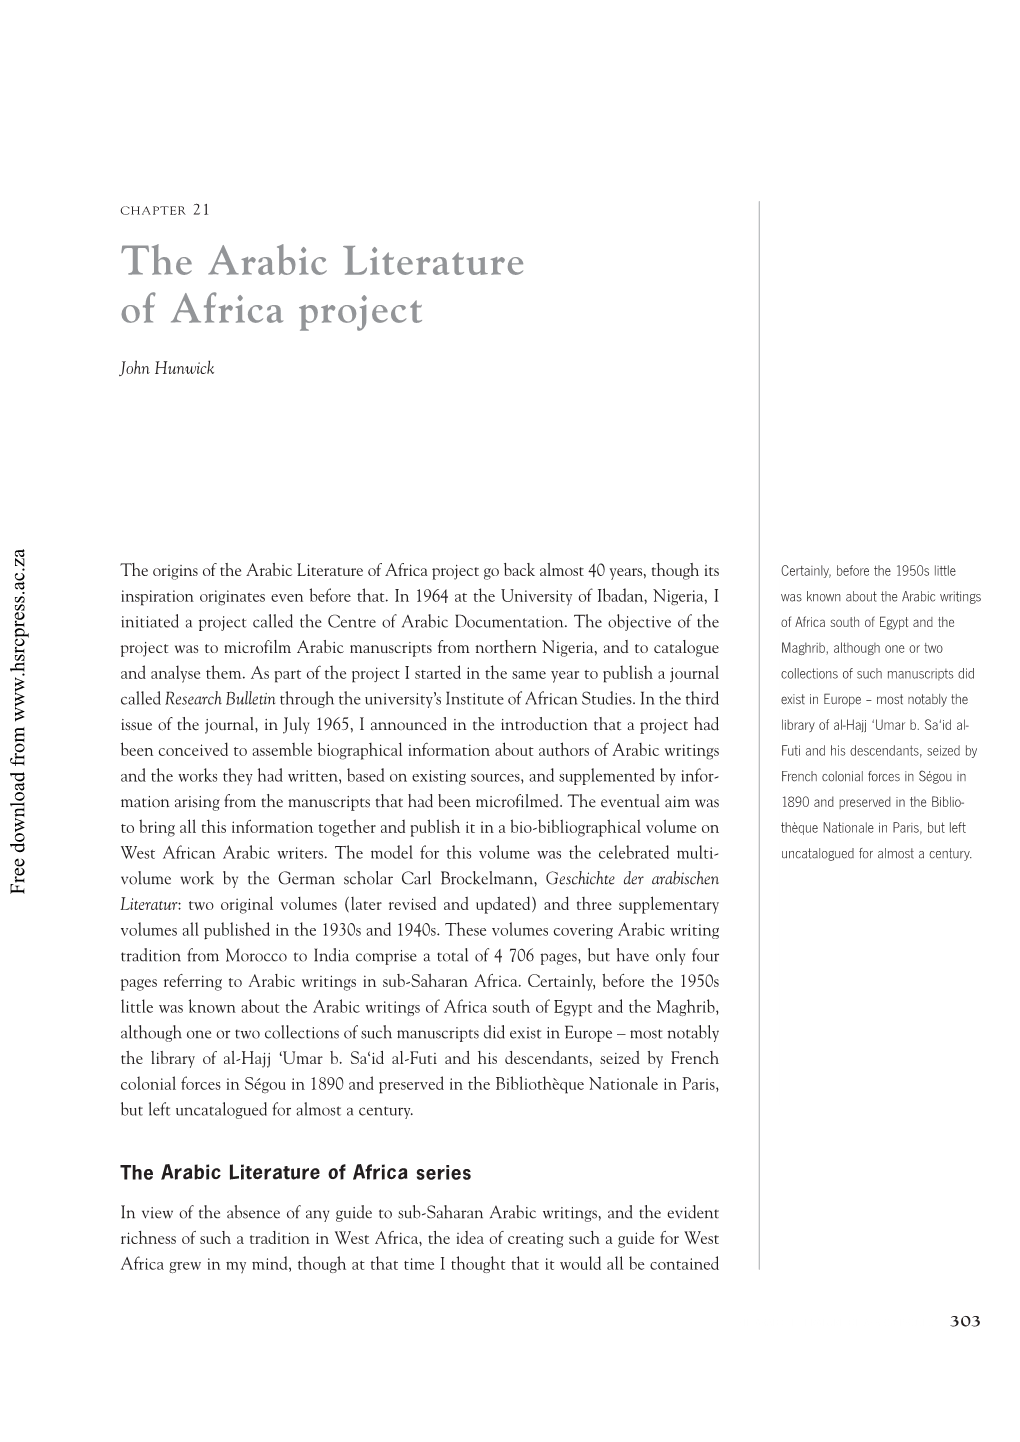 The Arabic Literature of Africa Project